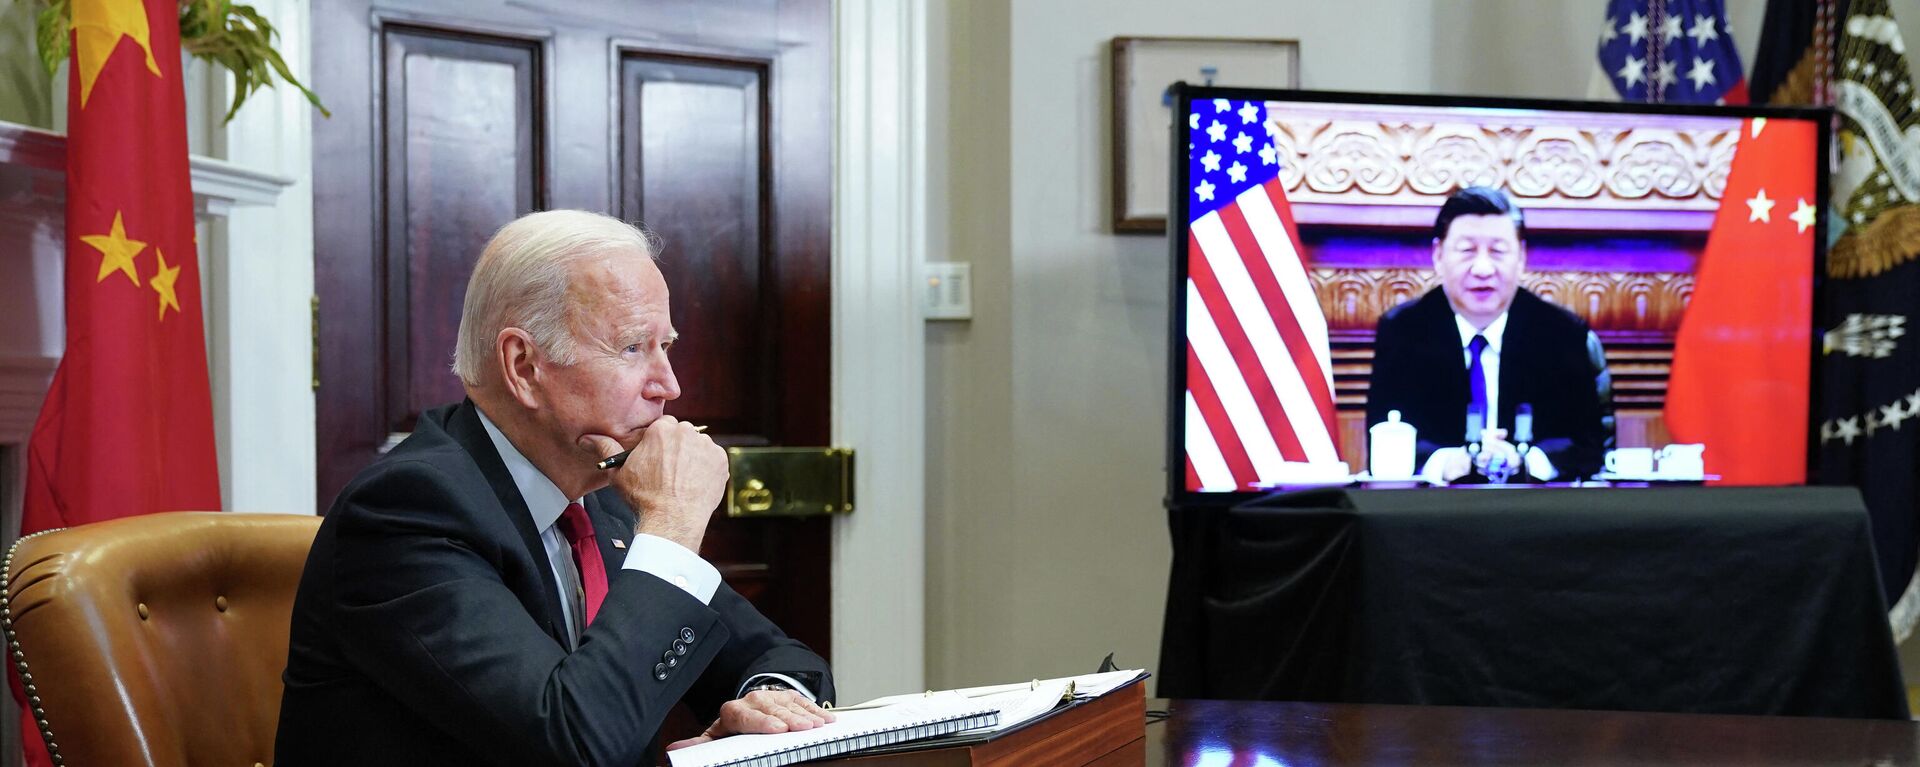 US President Joe Biden meets with China's President Xi Jinping during a virtual summit from the Roosevelt Room of the White House in Washington, DC, November 15, 2021.  - Sputnik International, 1920, 19.11.2021